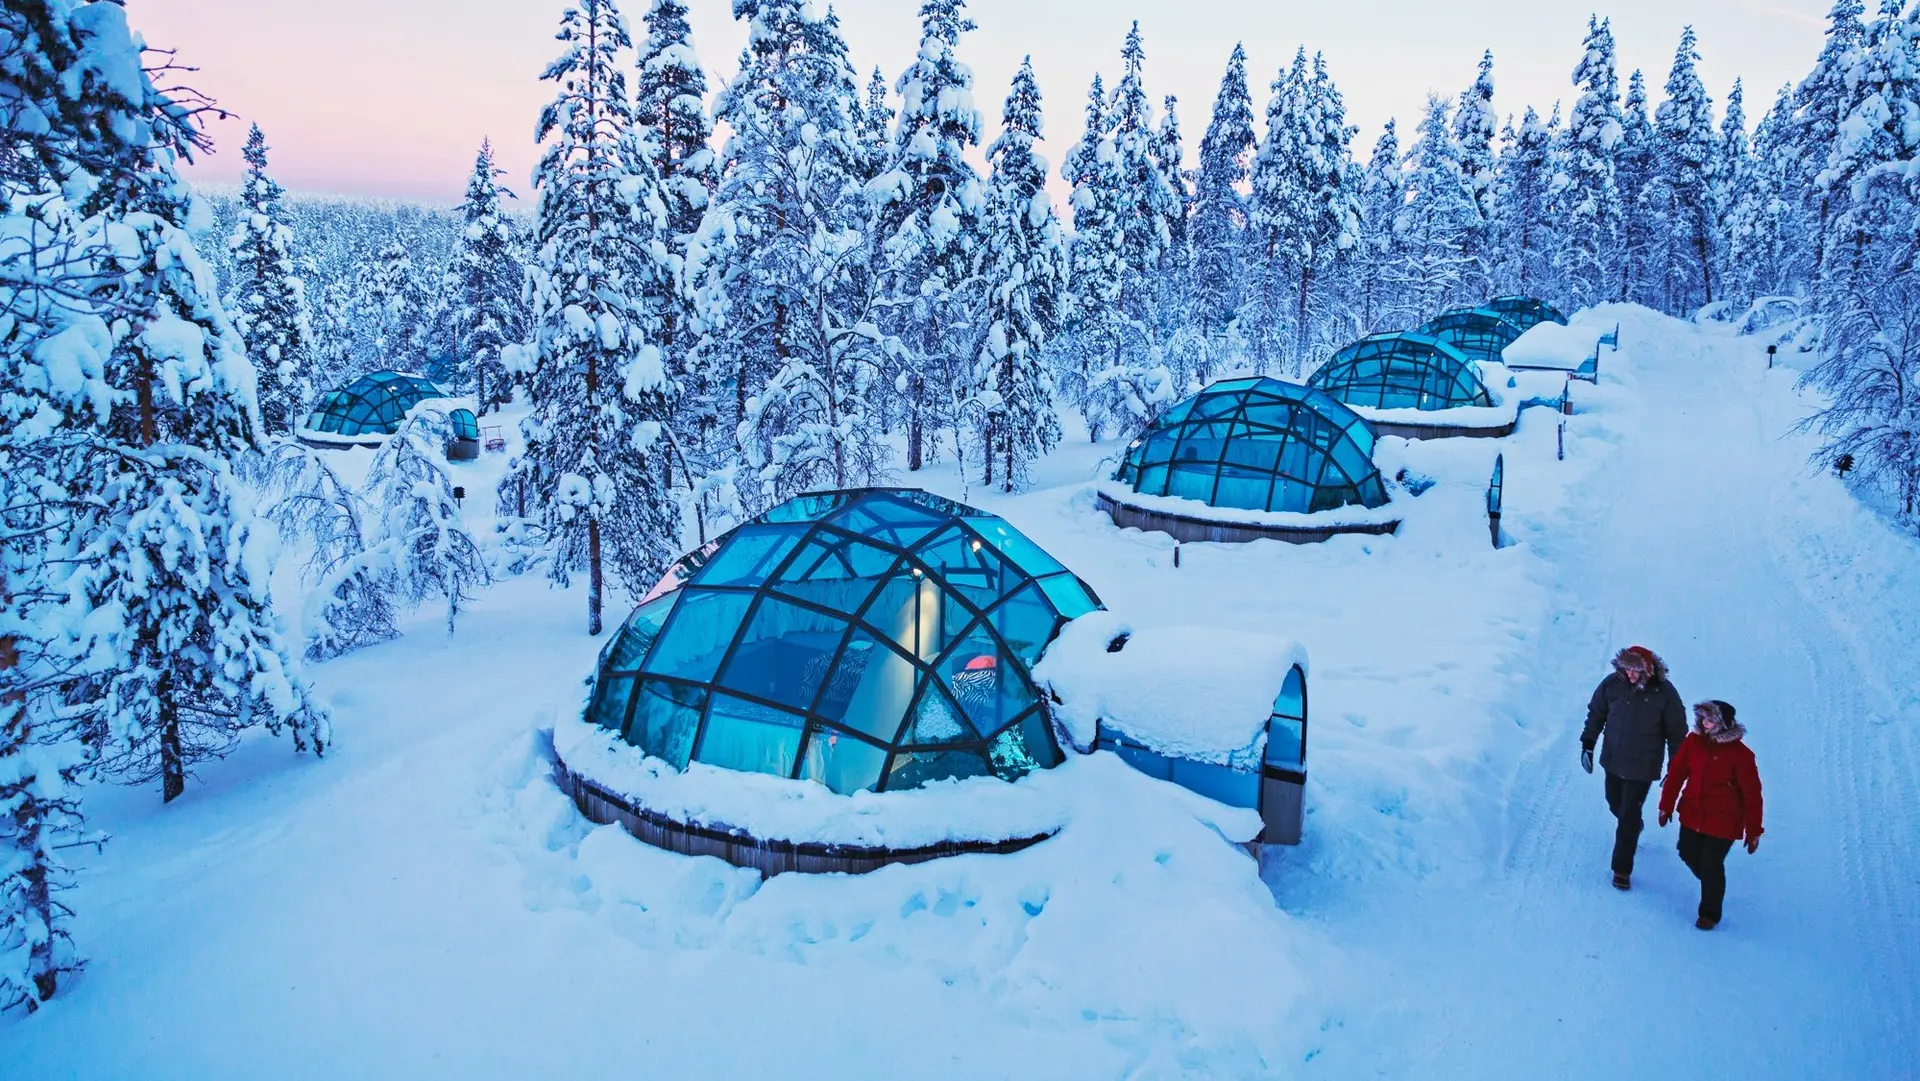 Hotel review Accommodation' - Kakslauttanen Arctic Resort - Igloos and Chalets - 0